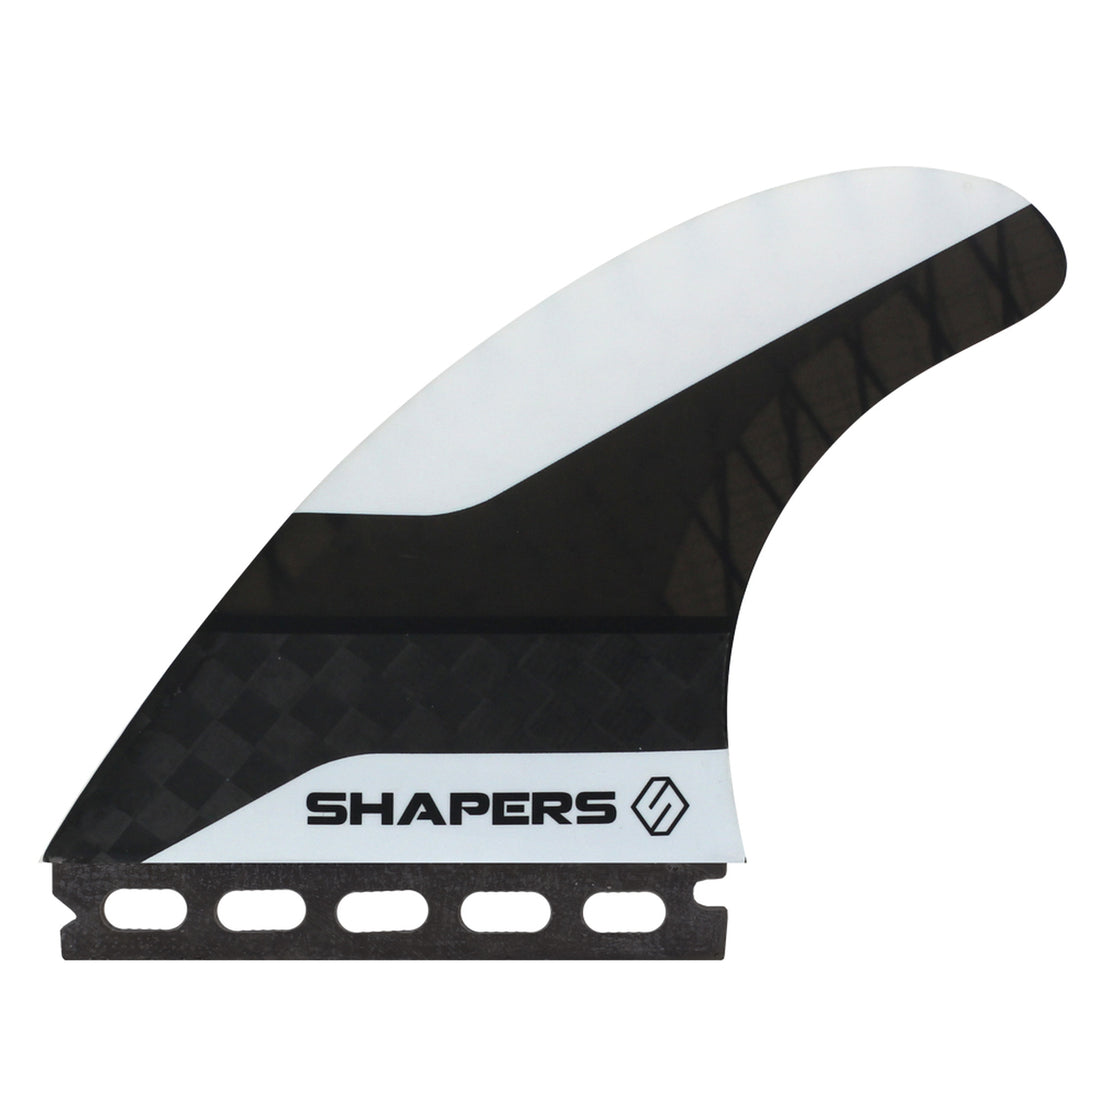 Shapers Fins - CarbonFlare Driver (Futures) - White - Medium/Large